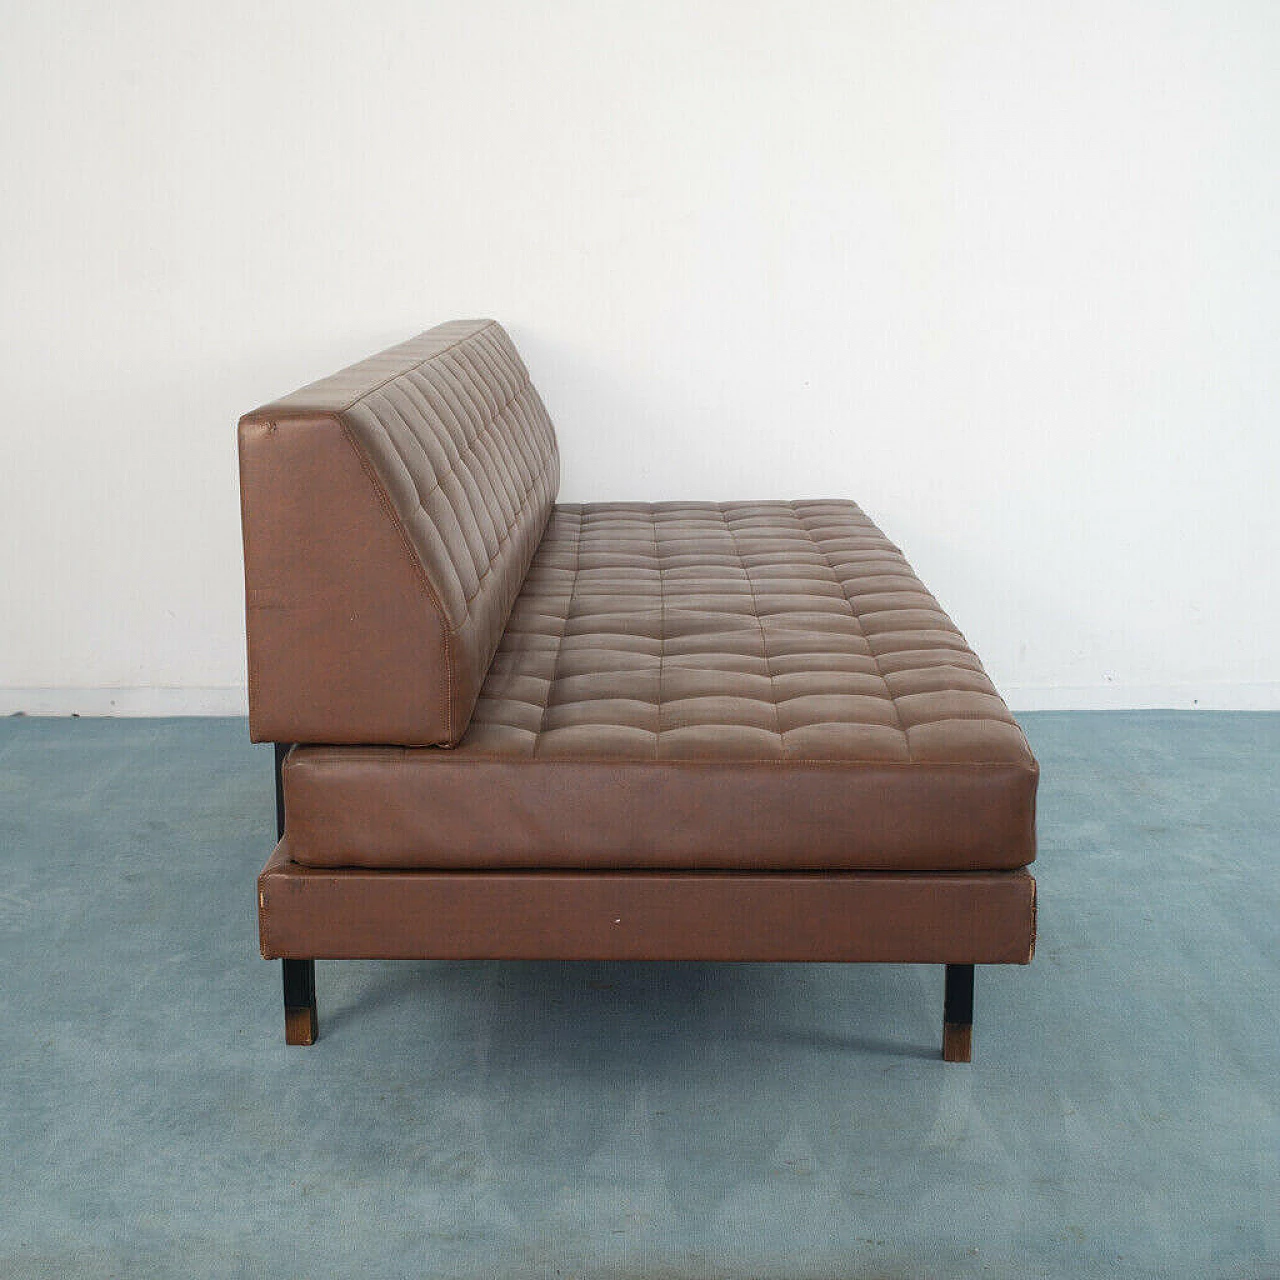 3-Seater sofa or daybed by Marco Zanuso for Flexform, 1950s 1183332